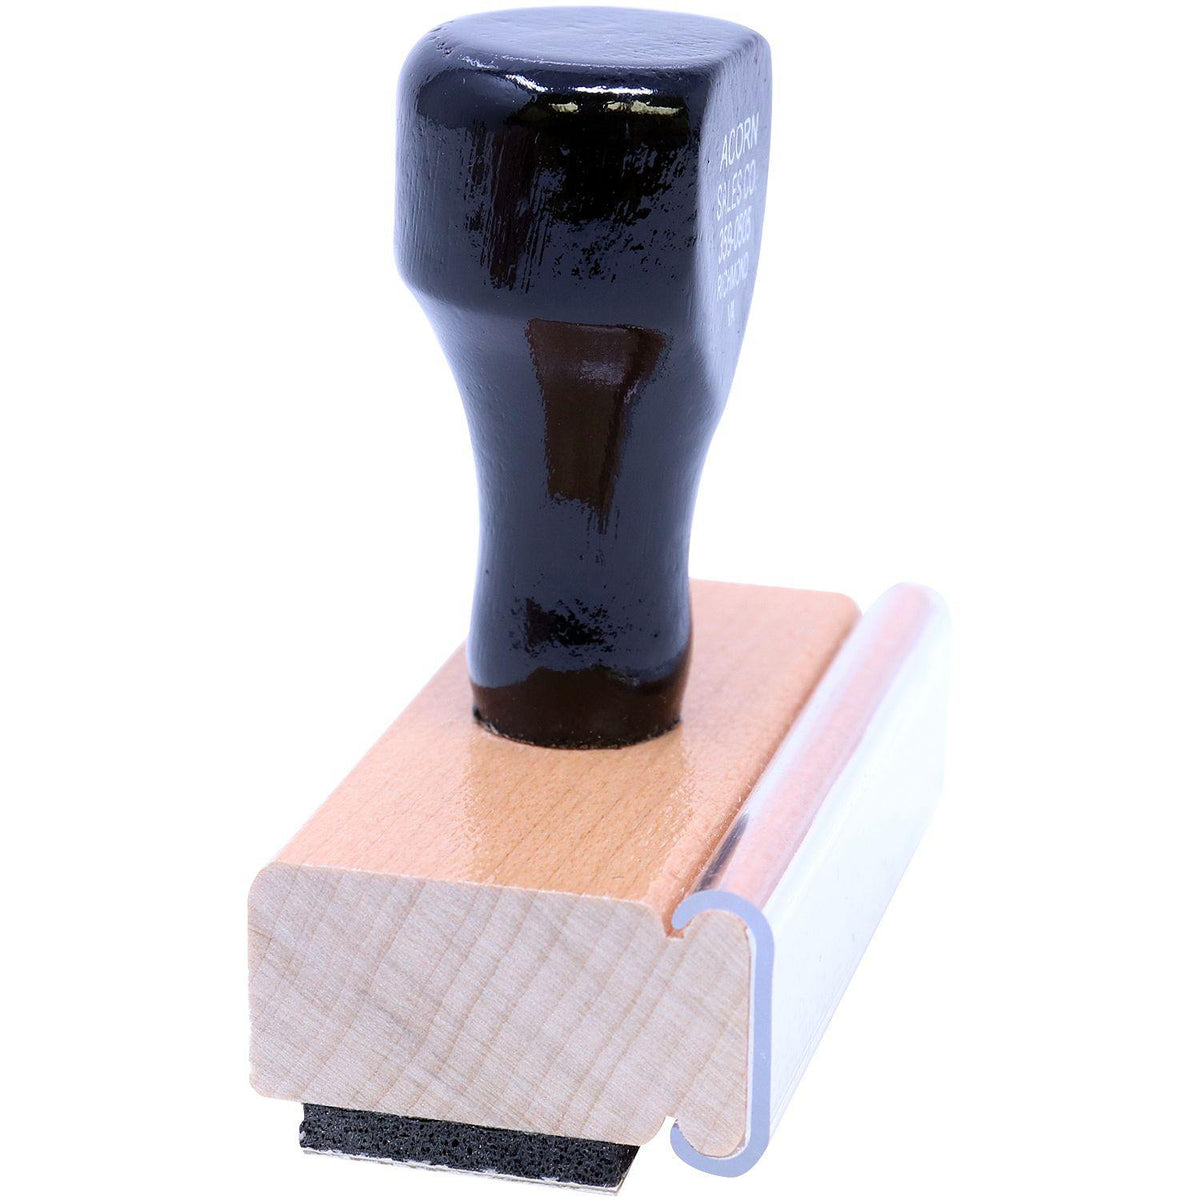 Side View of Bold Banco Rubber Stamp at an Angle